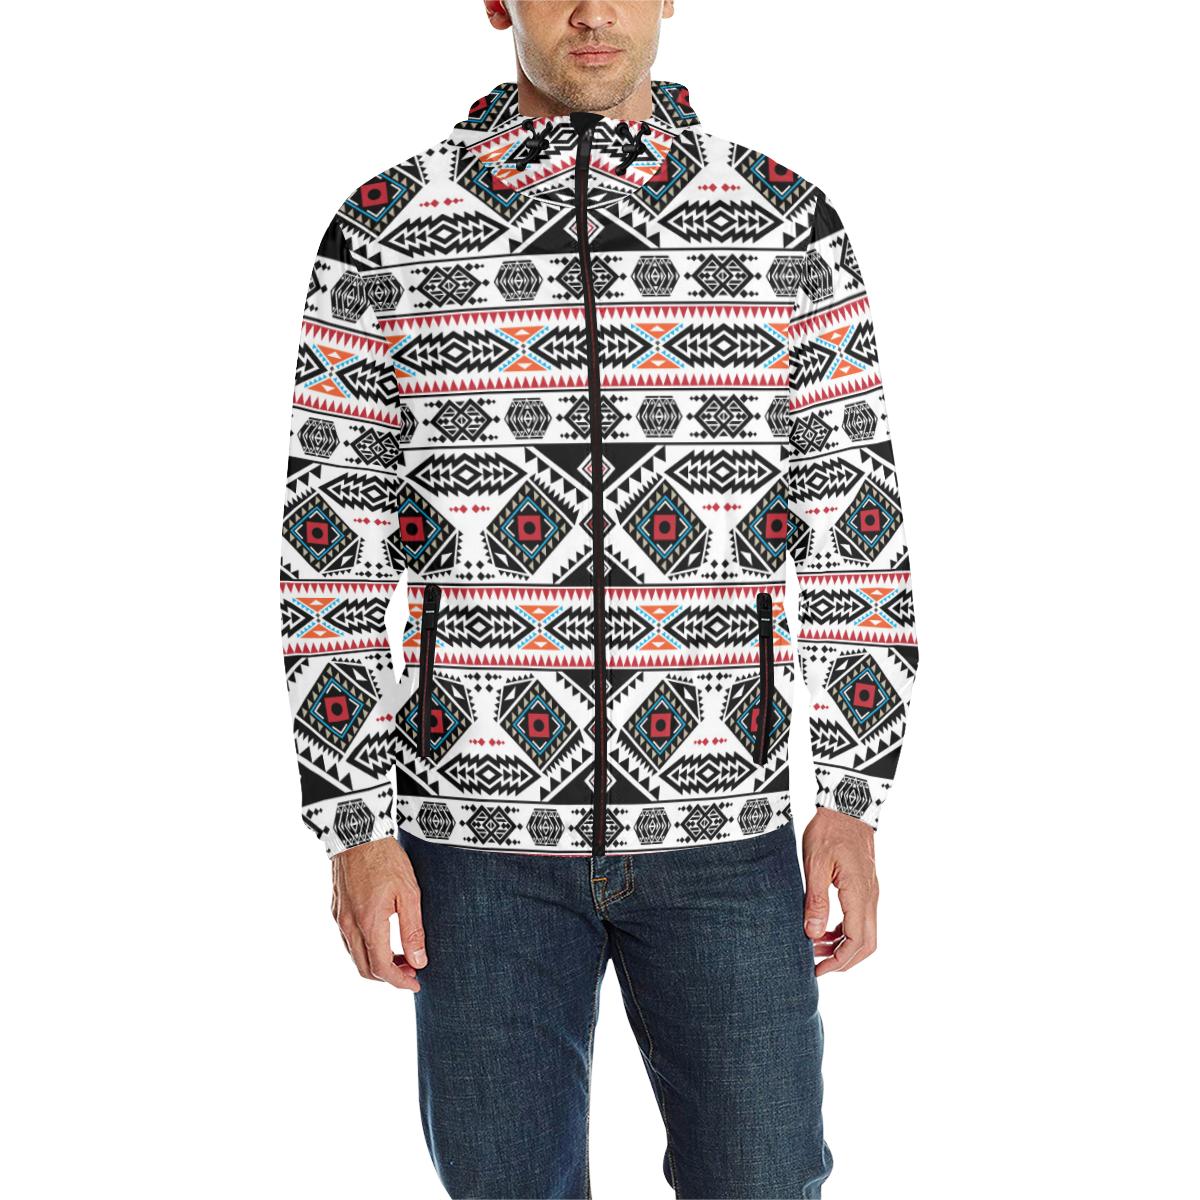 California Coast Unisex Quilted Coat All Over Print Quilted Windbreaker for Men (H35) e-joyer 